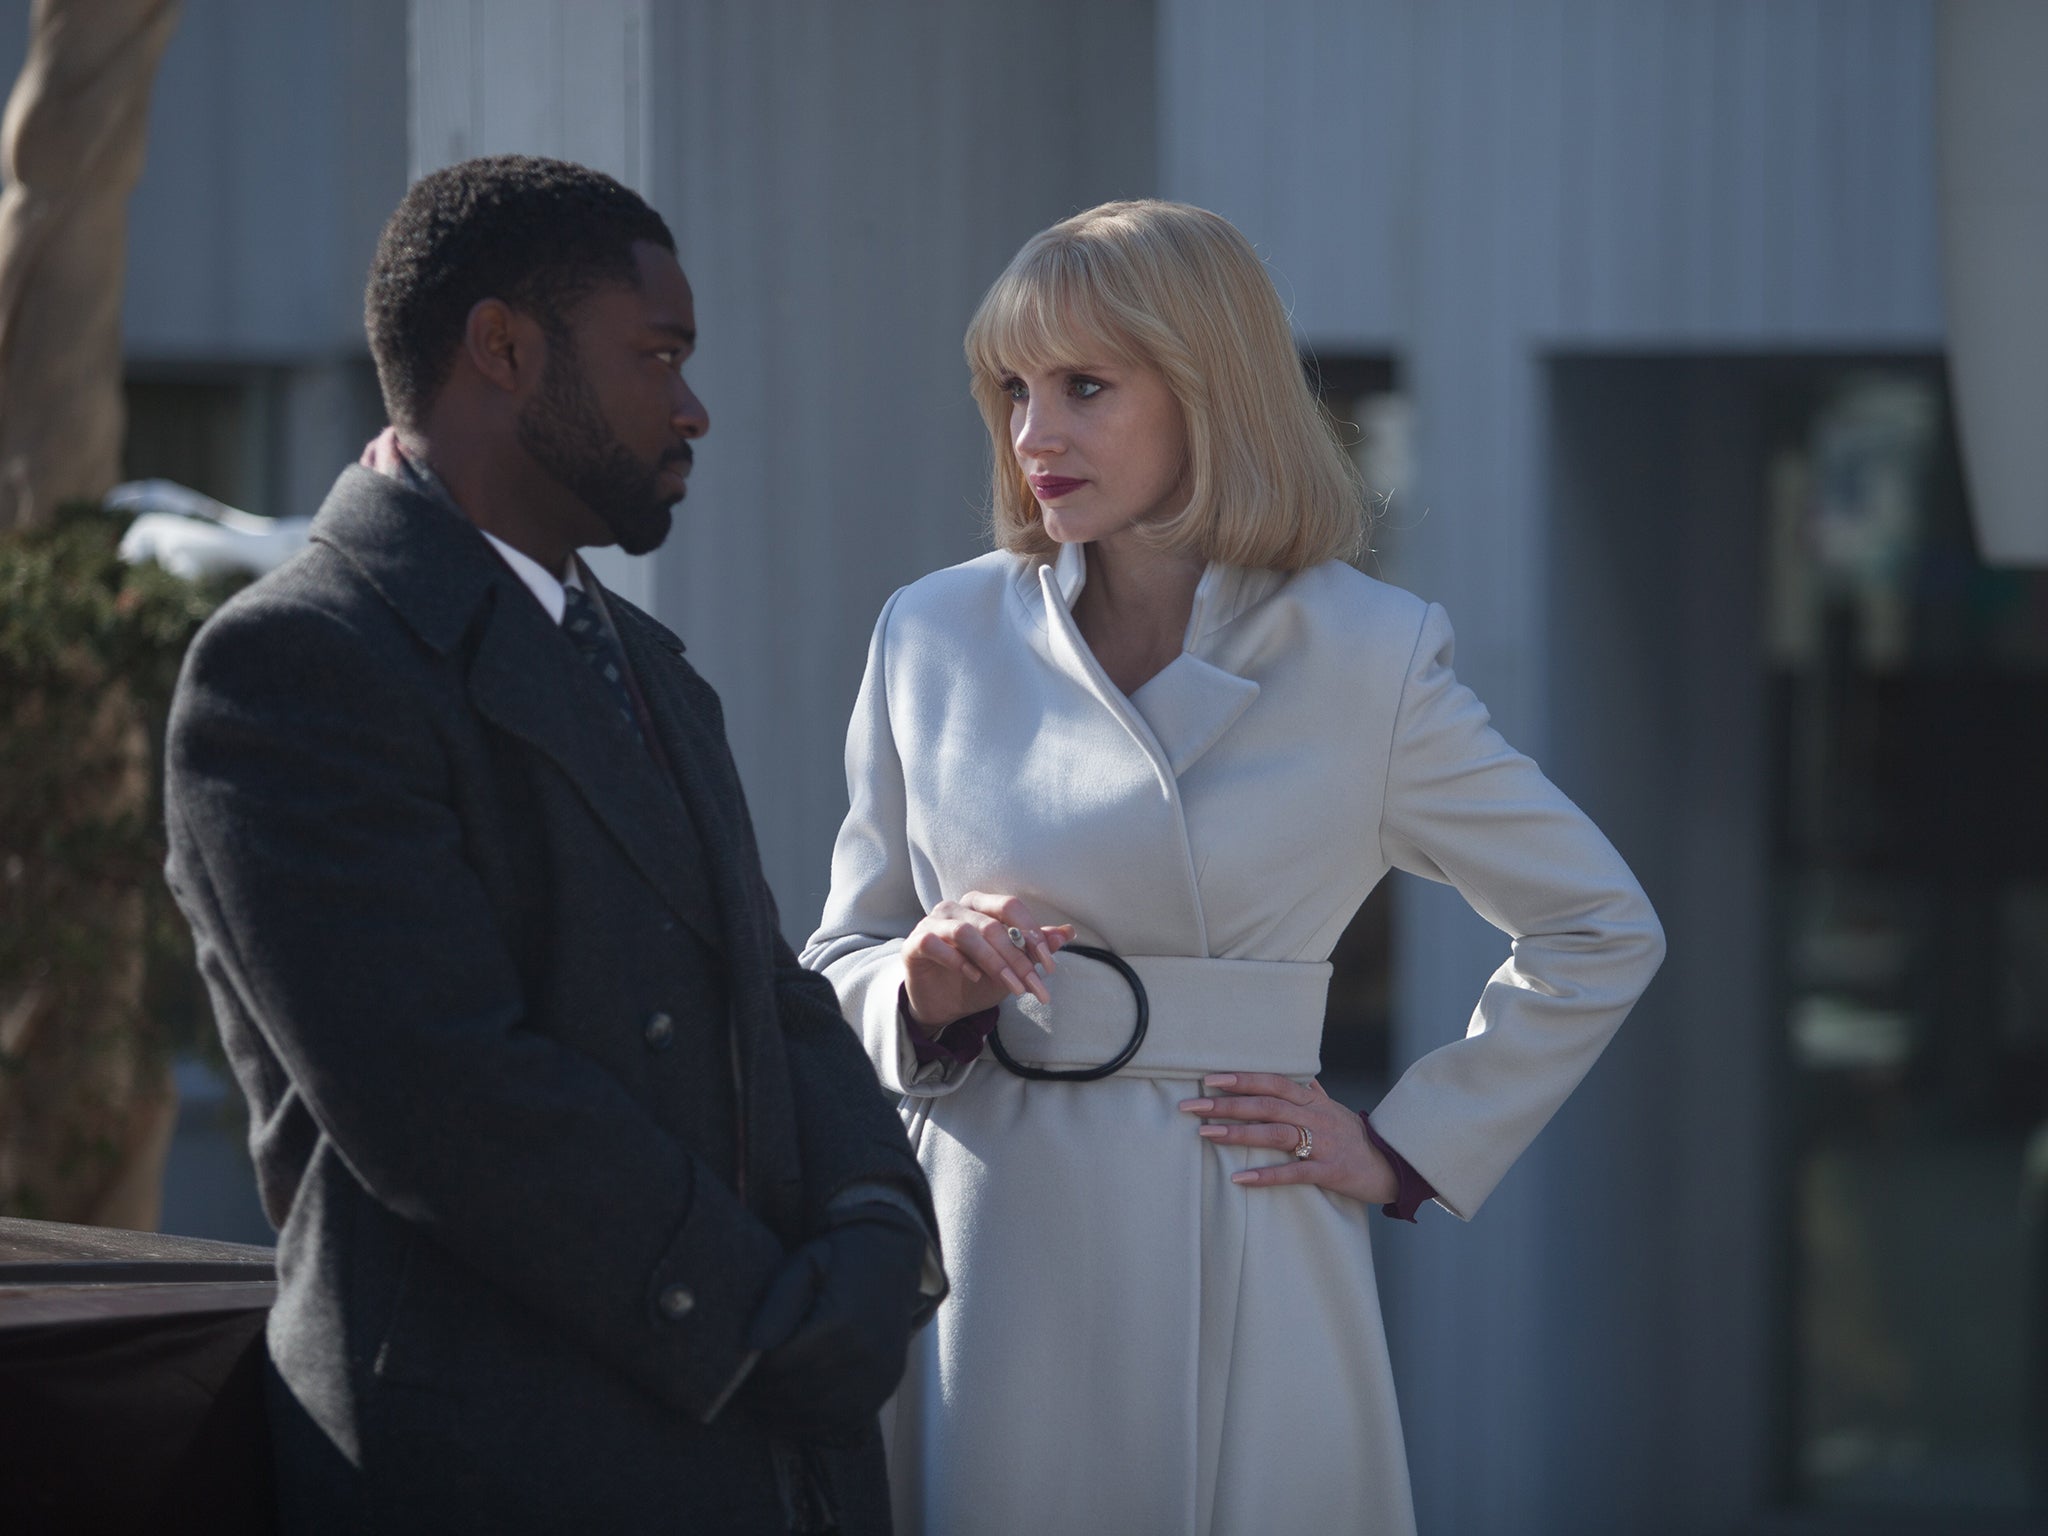 David Oyelowo and Jessica Chastain in ‘A Most Violent Year’